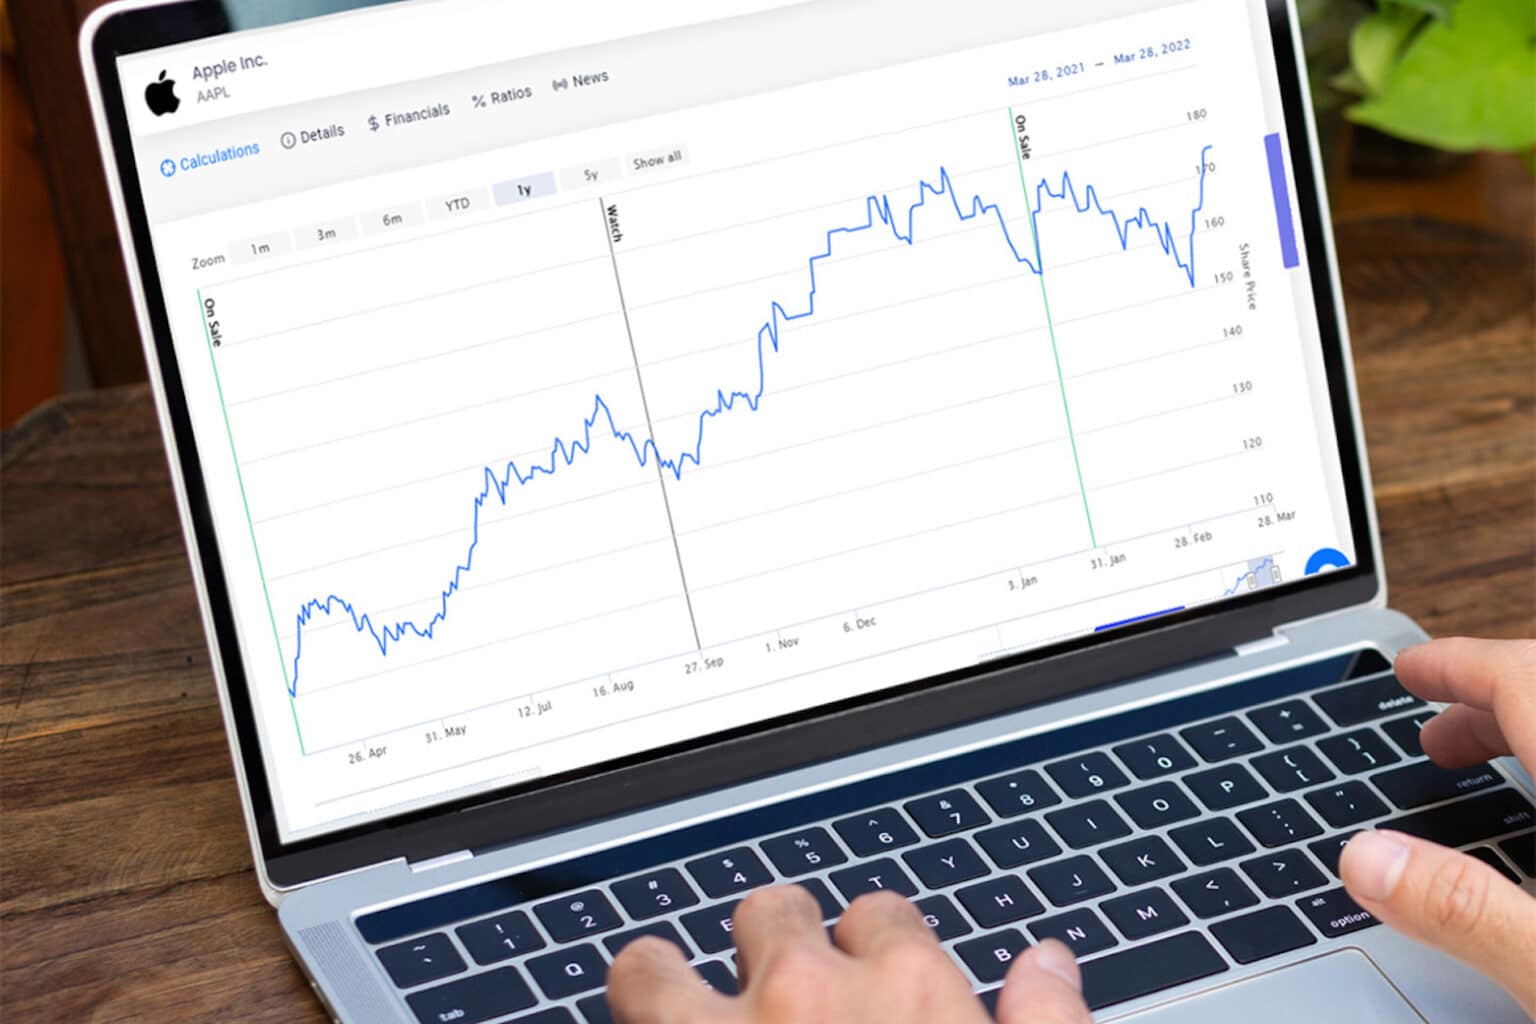 Get to know the stock market with an extra $20 off this trading analytics bundle.